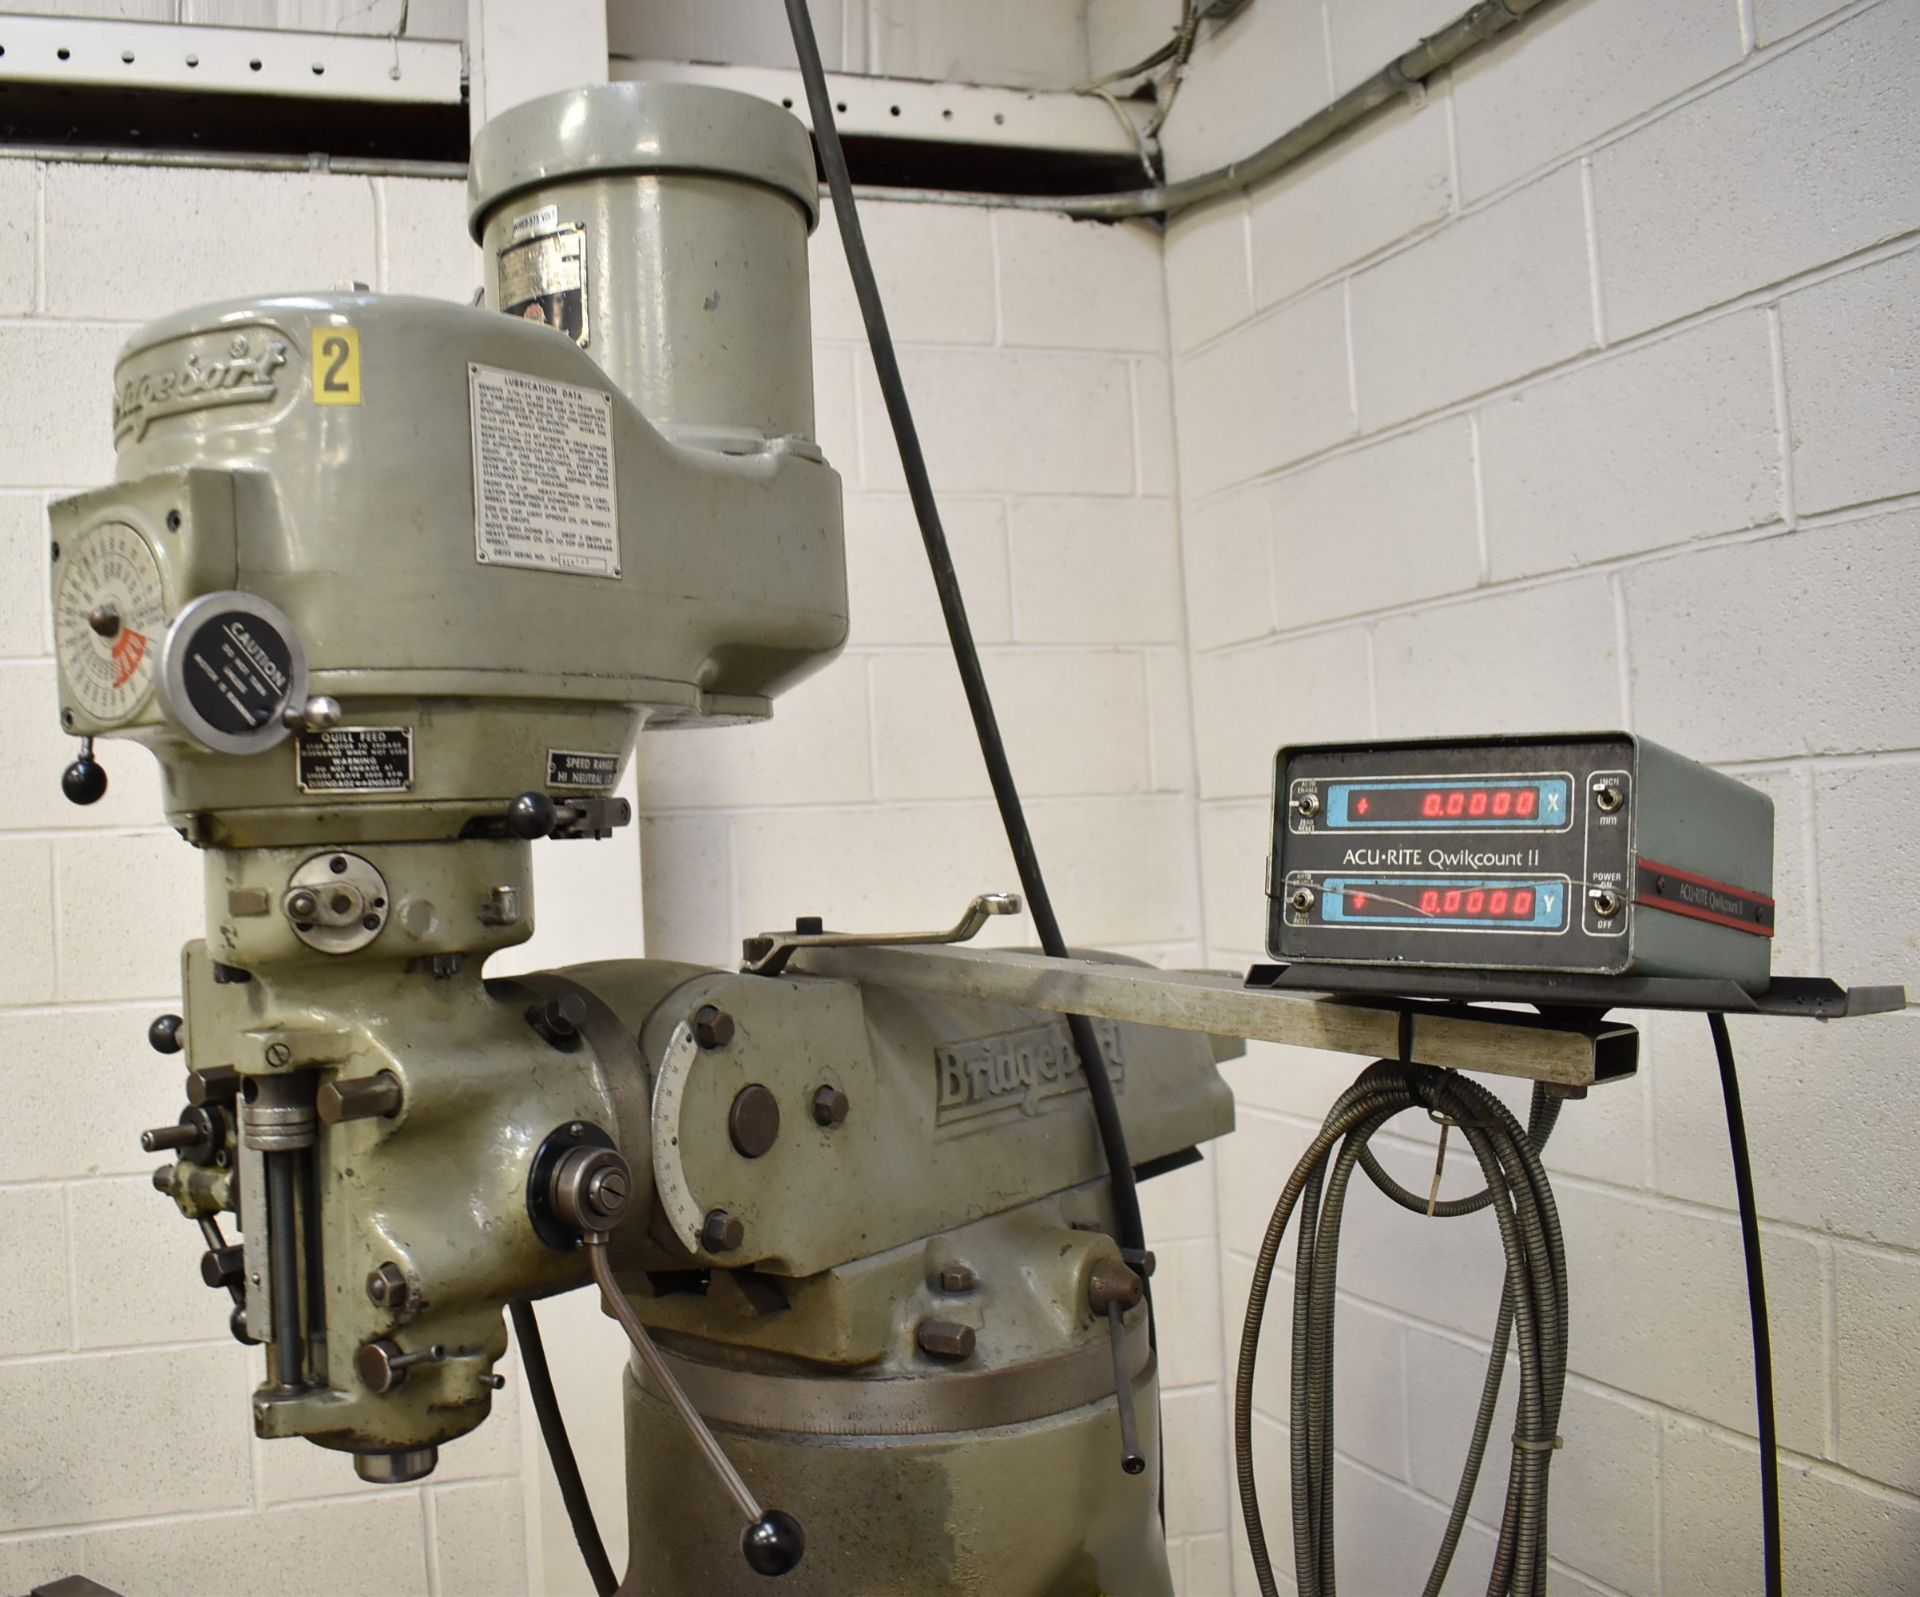 BRIDGEPORT 70745 VERTICAL MILLING MACHINE WITH 42" X 9" TABLE, SPEEDS TO 4,200 RPM, ACU-RITE - Image 7 of 8